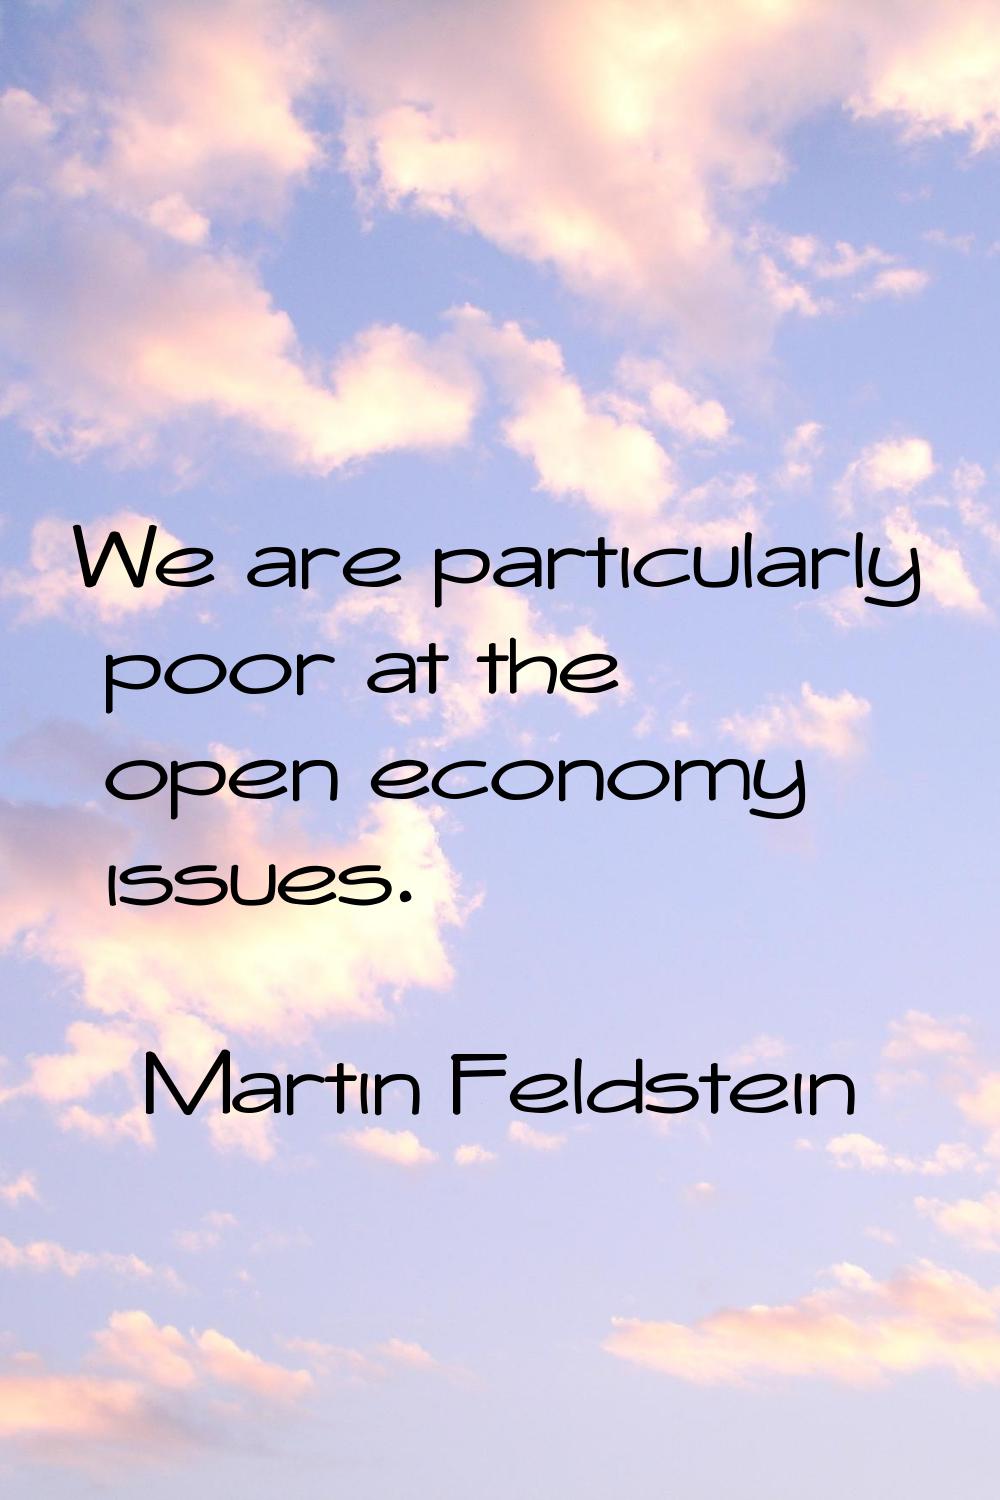 We are particularly poor at the open economy issues.